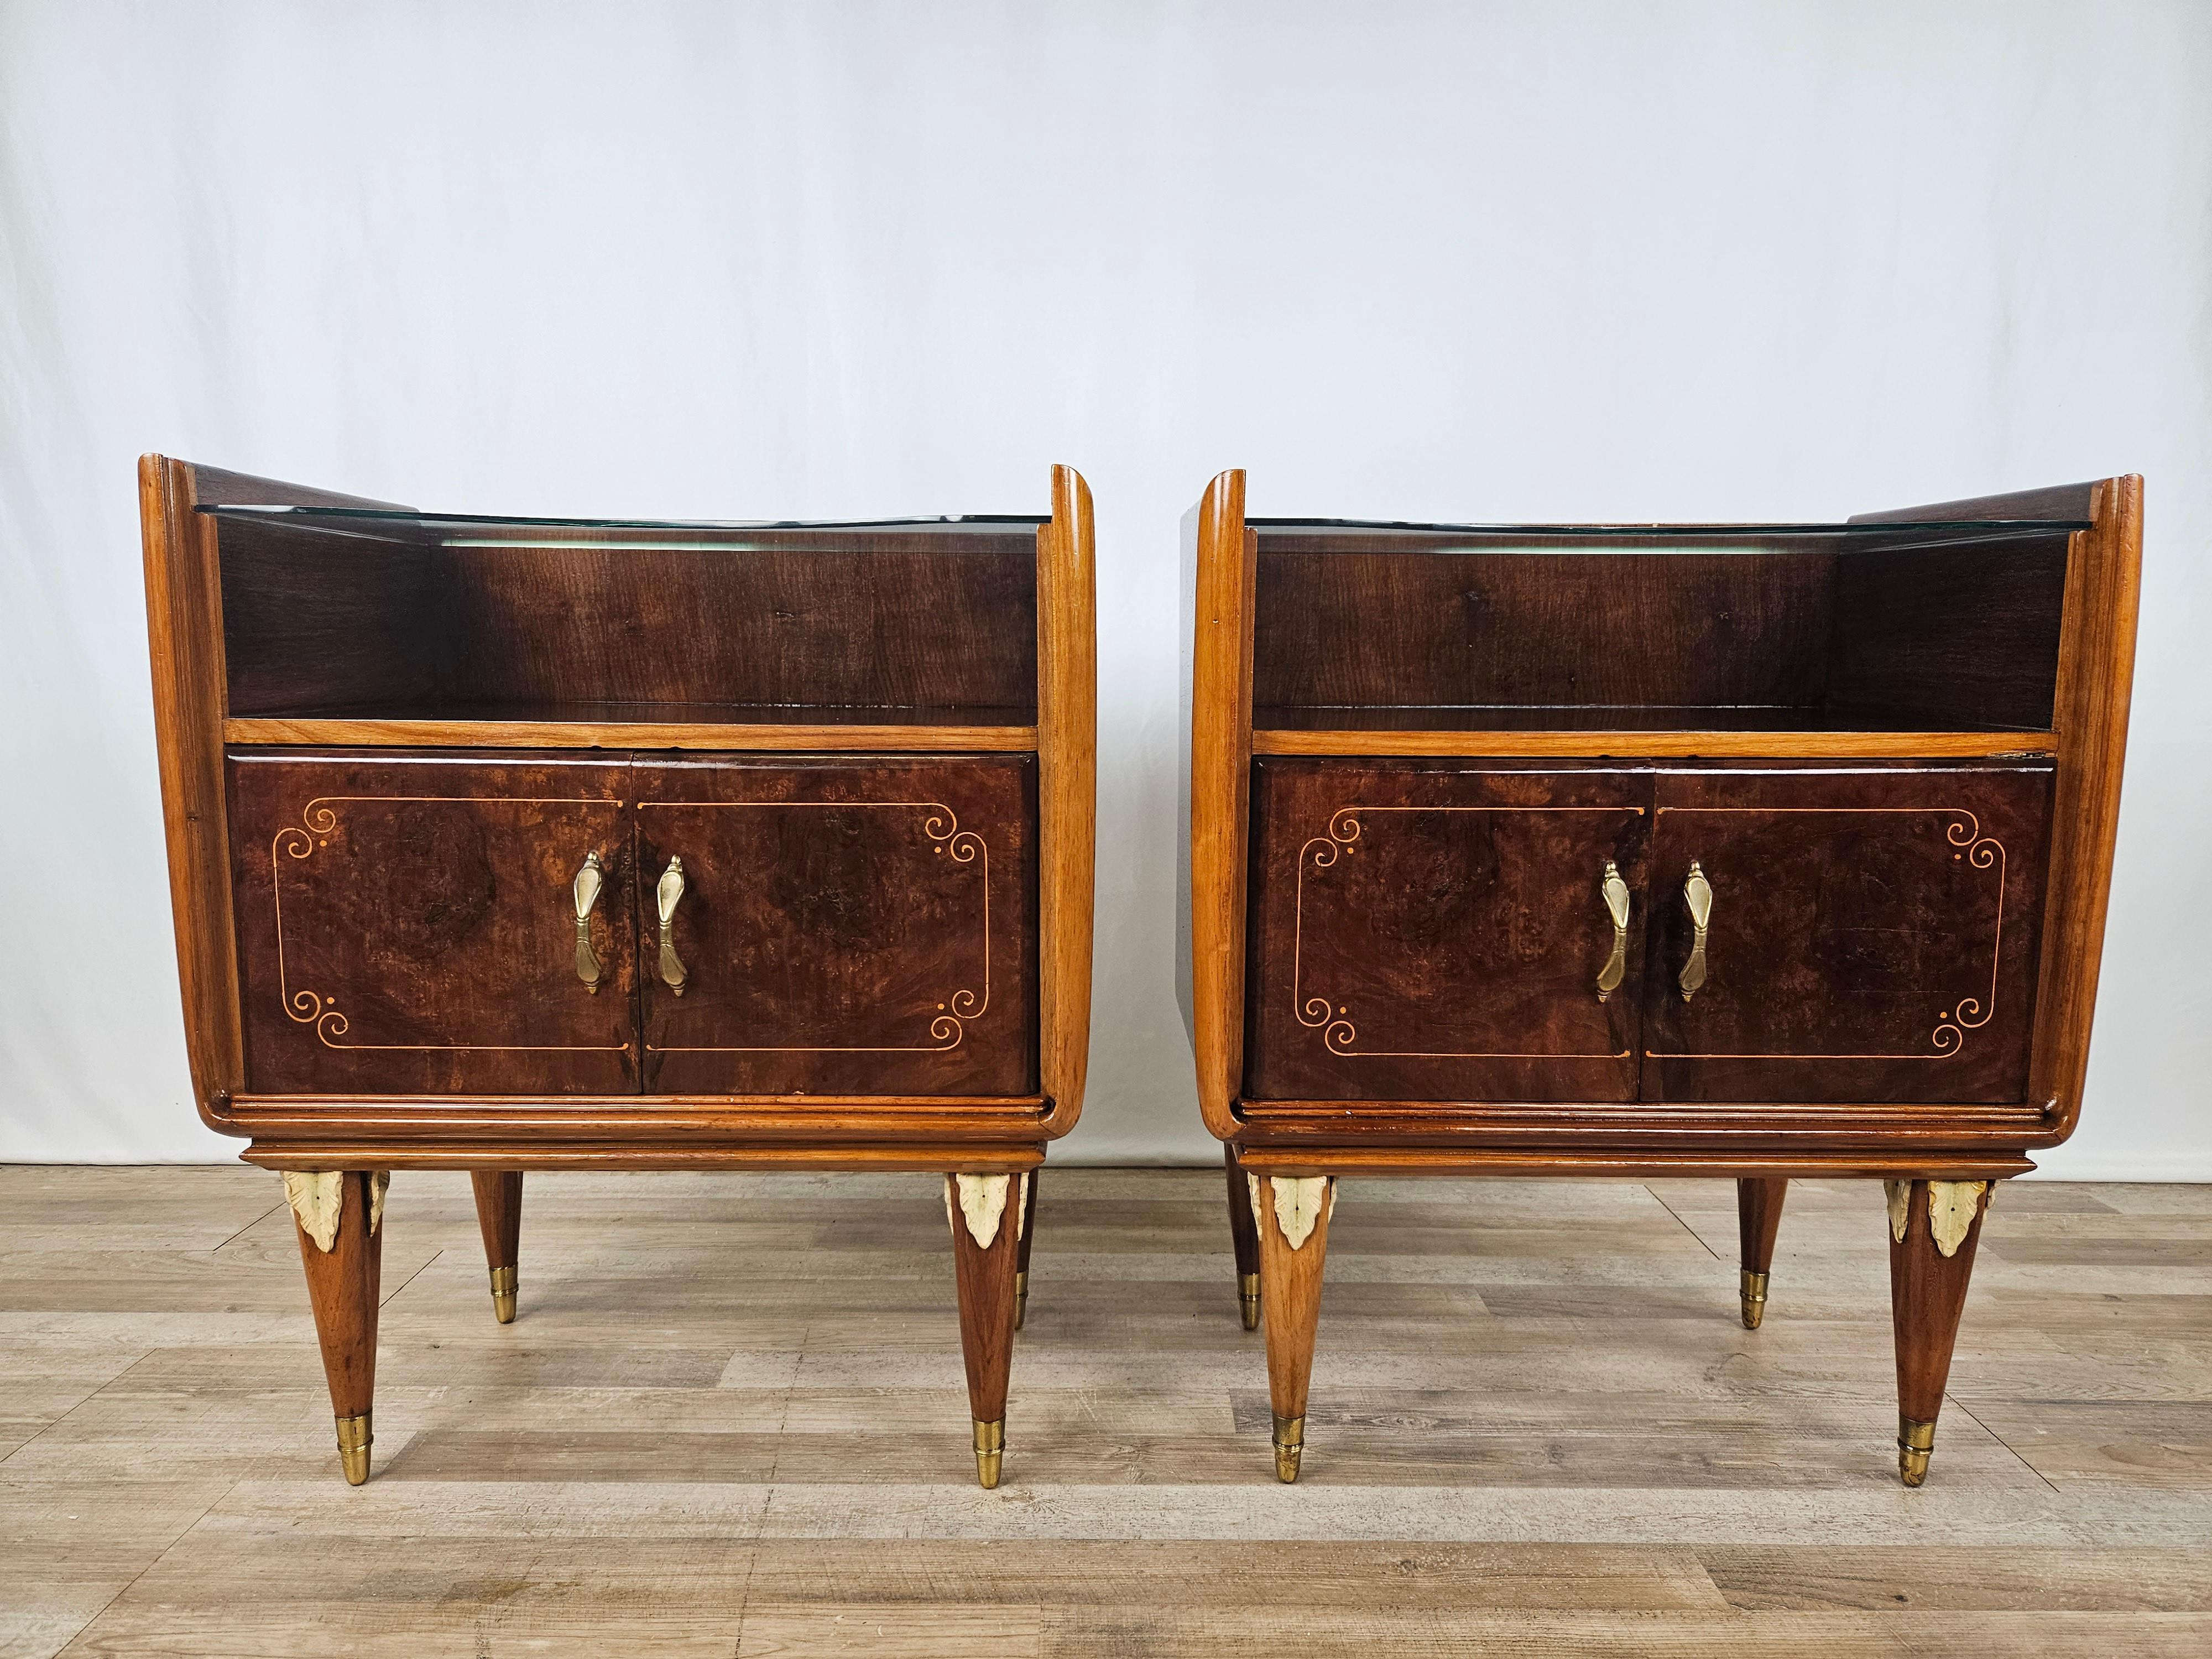 Peculiar pair of early 1950s bedside tables in walnut with maple details and inlays, enhanced by a curved clear glass top.

Elegant, for classy and designer environments.

Note the curved frame at the base of the laterals and the feet with wooden